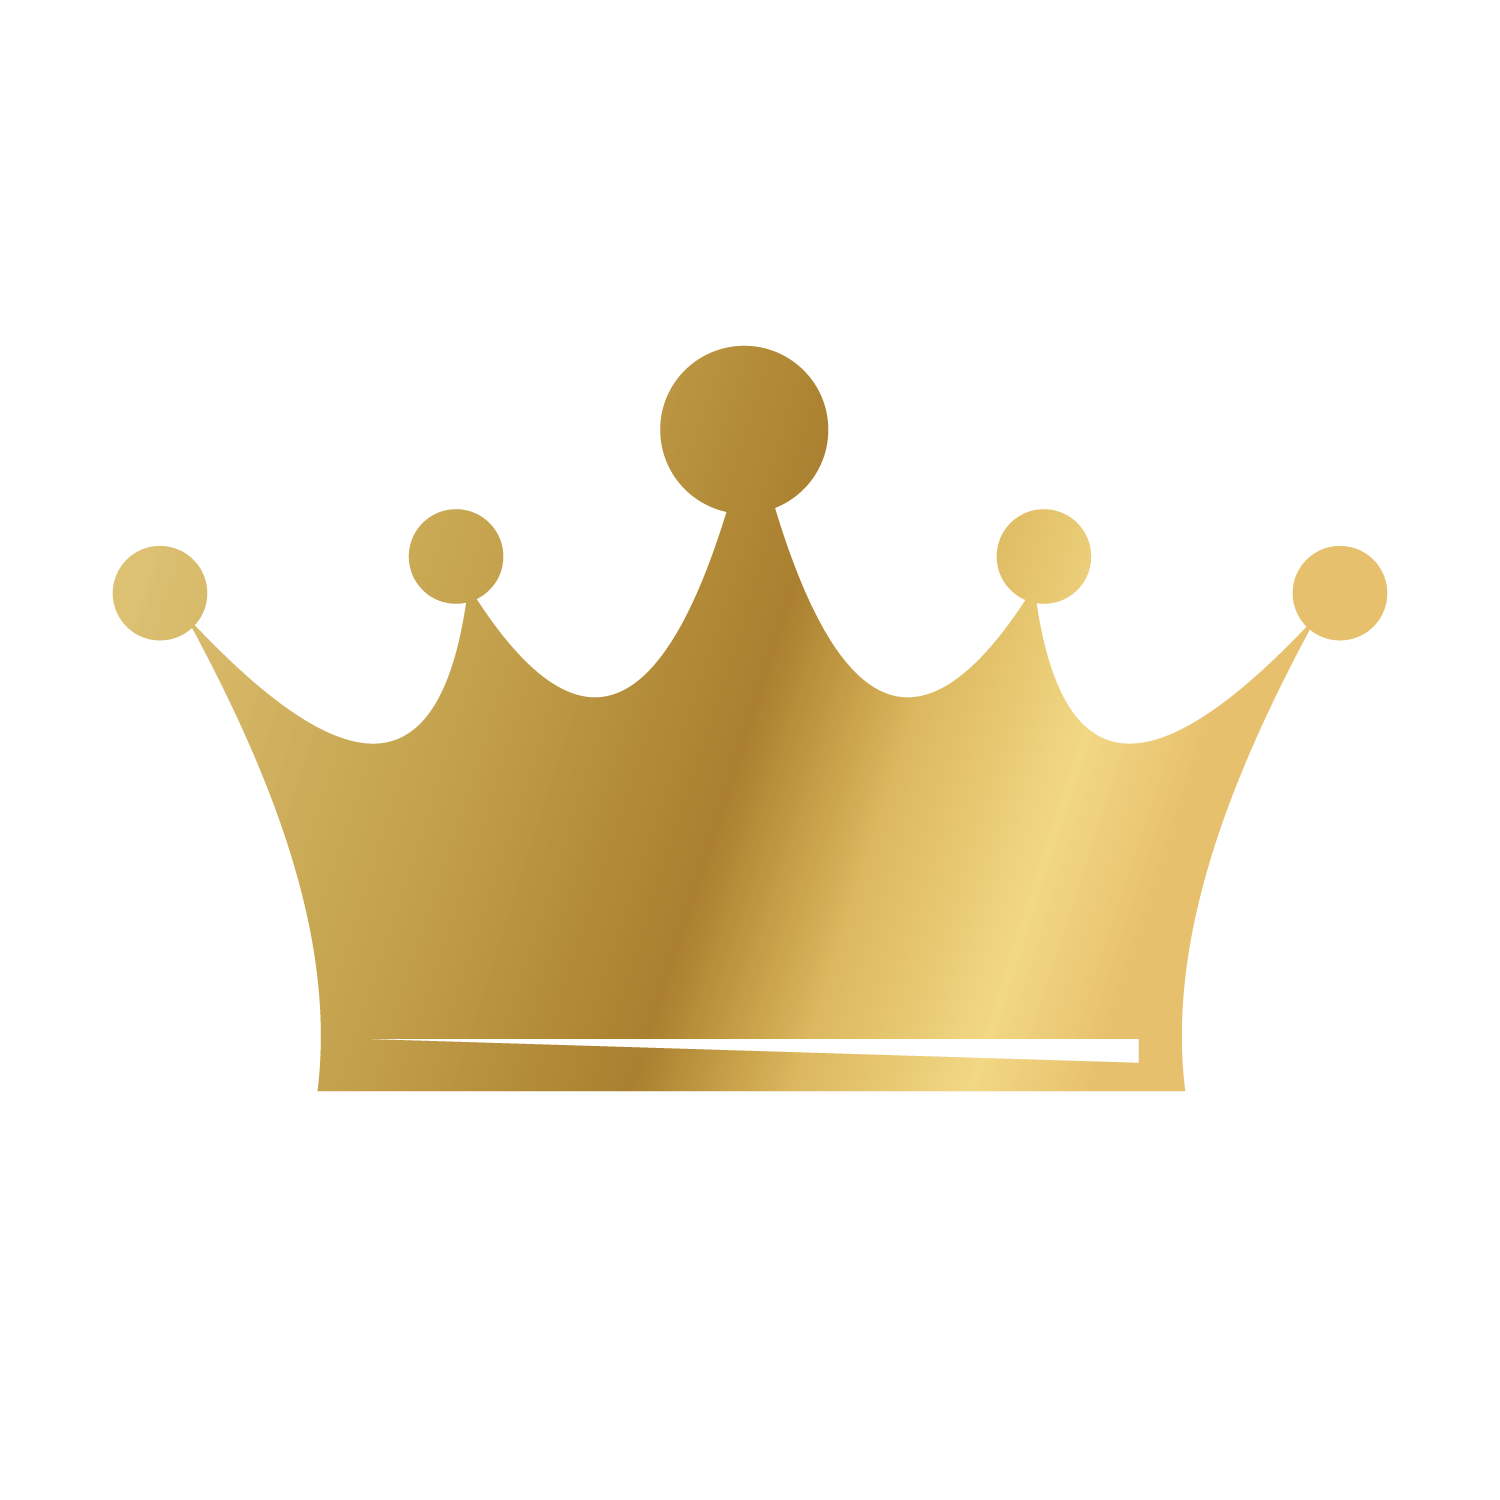 Download Clip art - Yellow gold crown png download - 1500*1500 - Free